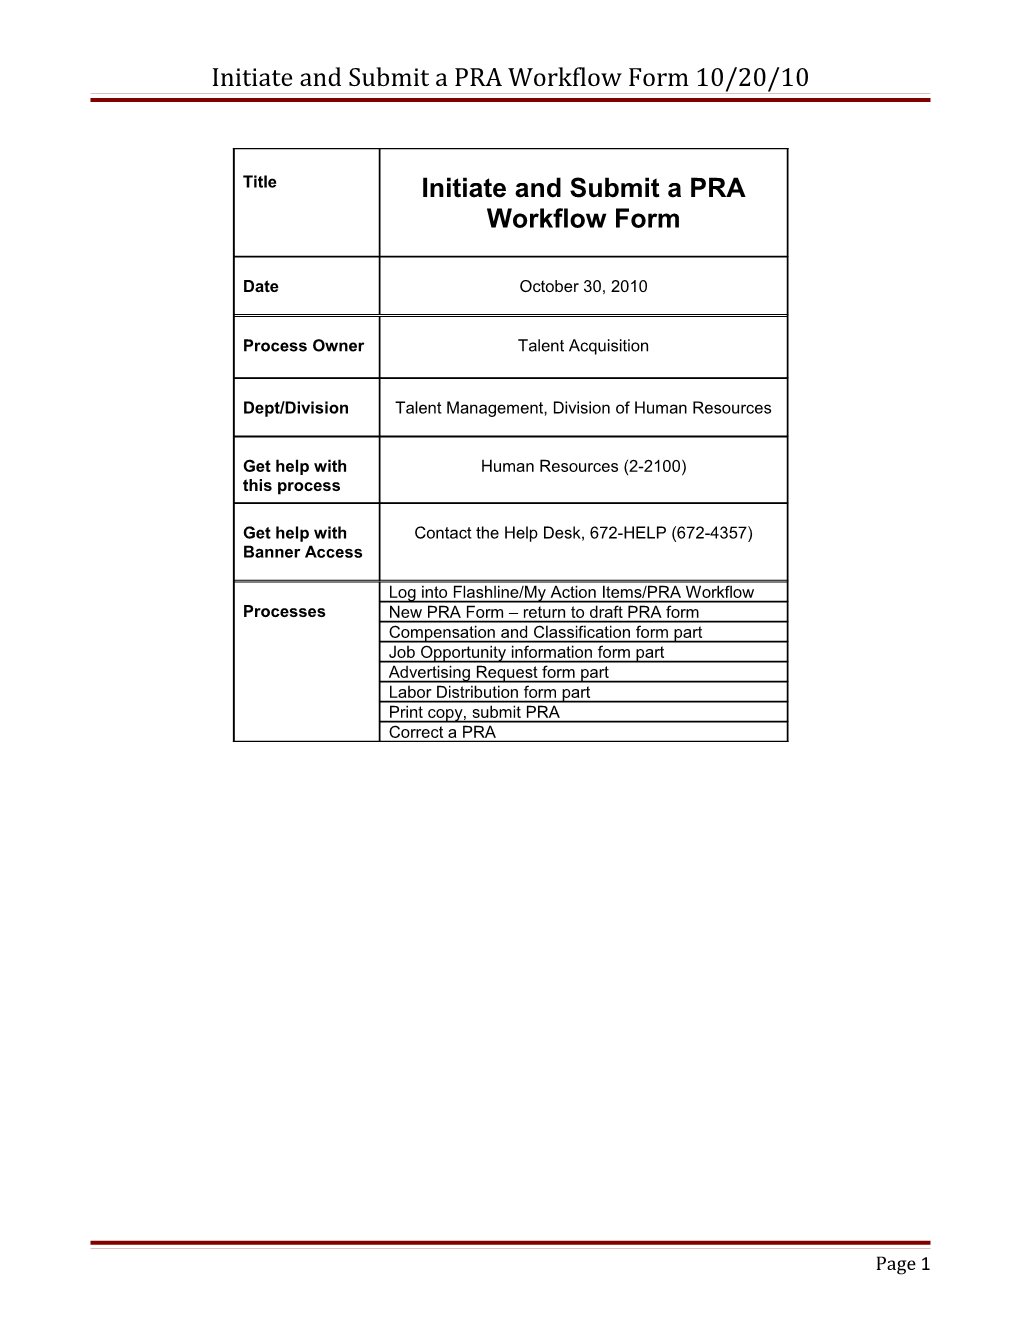 Initiate and Submit a PRA Workflow Form 10/20/10